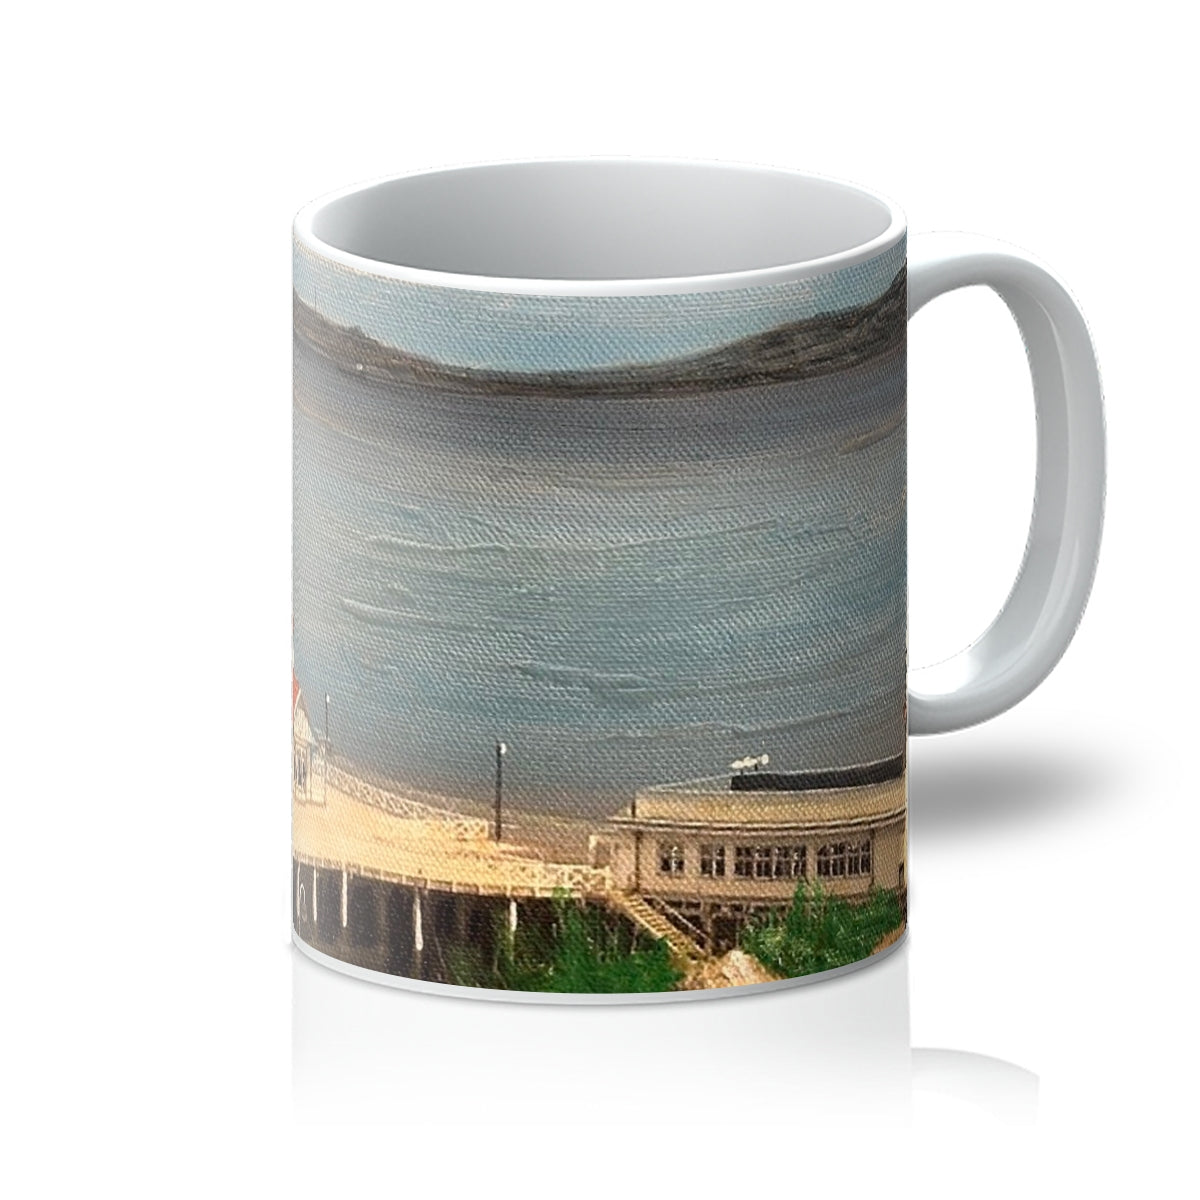 Looking From Dunoon Art Gifts Mug-Mugs-River Clyde Art Gallery-11oz-White-Paintings, Prints, Homeware, Art Gifts From Scotland By Scottish Artist Kevin Hunter